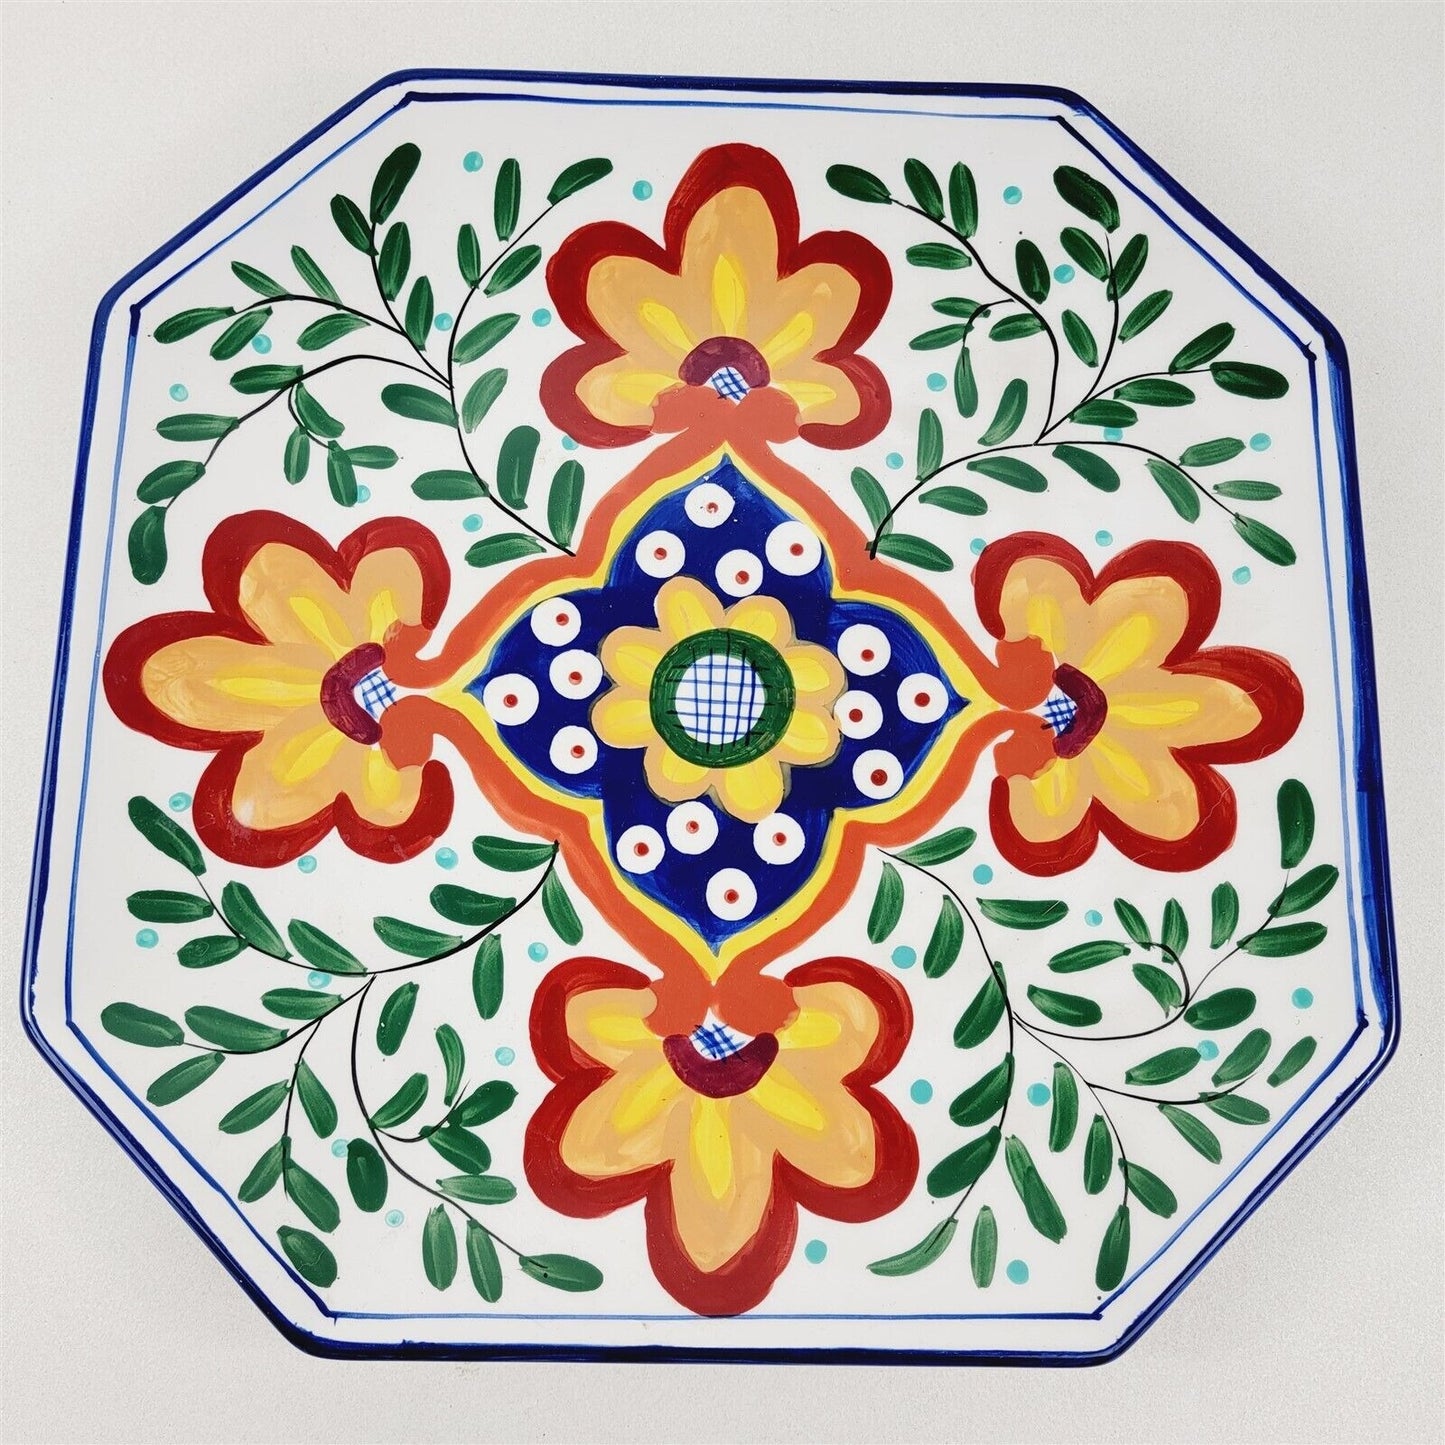 Certified International Octagon Colorful Painted Ceramic Platter Serving 13 x 13